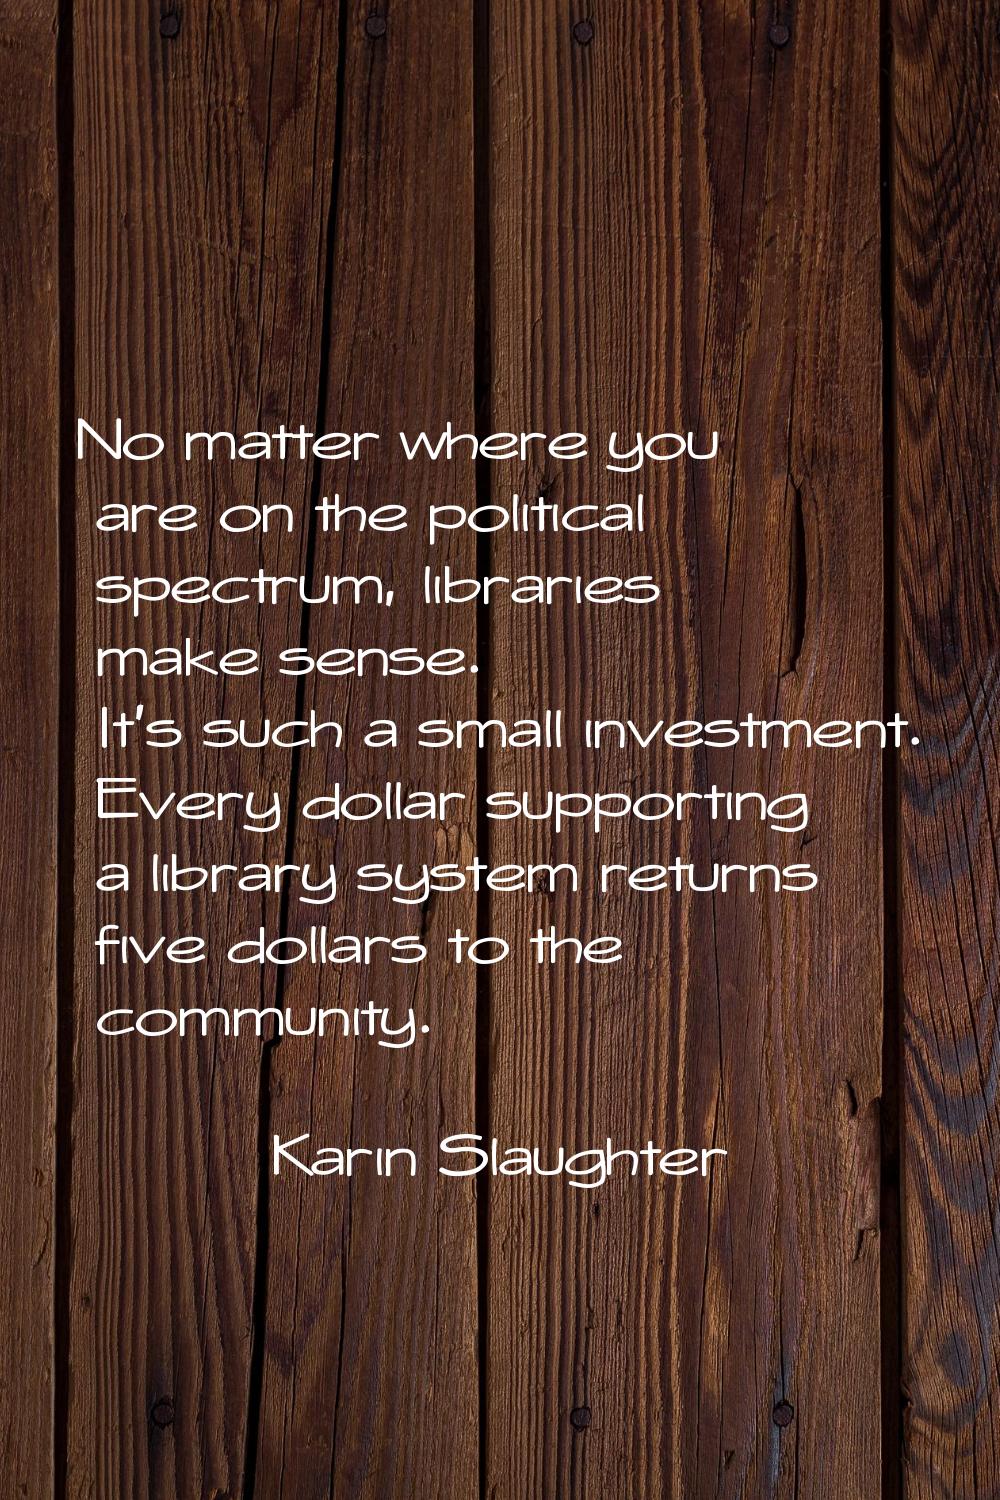 No matter where you are on the political spectrum, libraries make sense. It's such a small investme